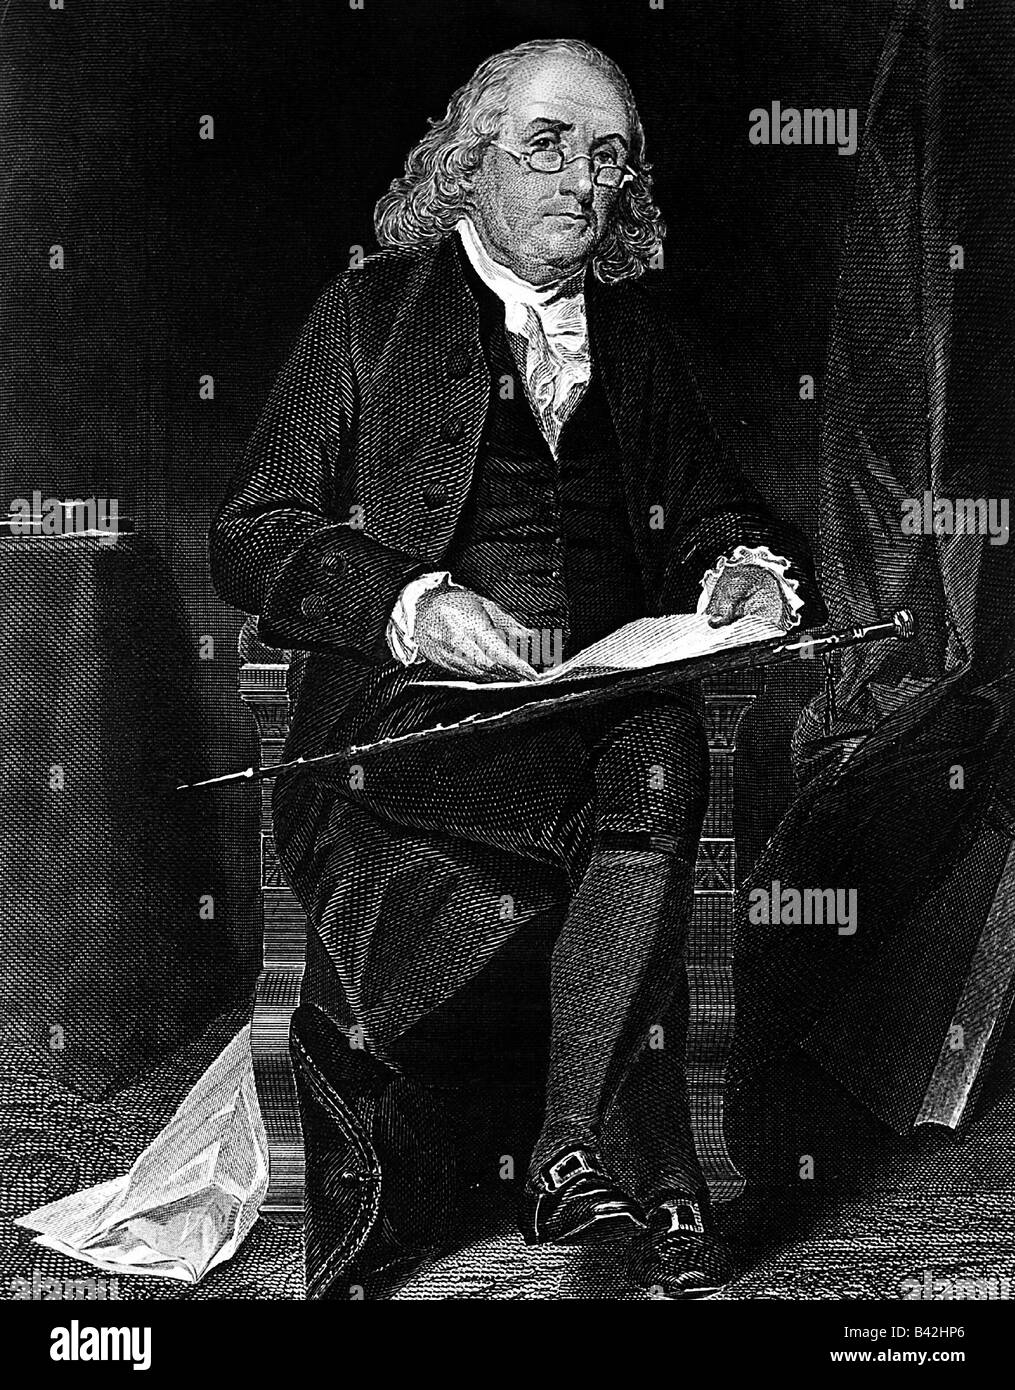 Franklin, Benjamin, 17.1.1706 - 17.4.1790, American natural scientist and politican, whole figure, engraving, 19th century, , Stock Photo